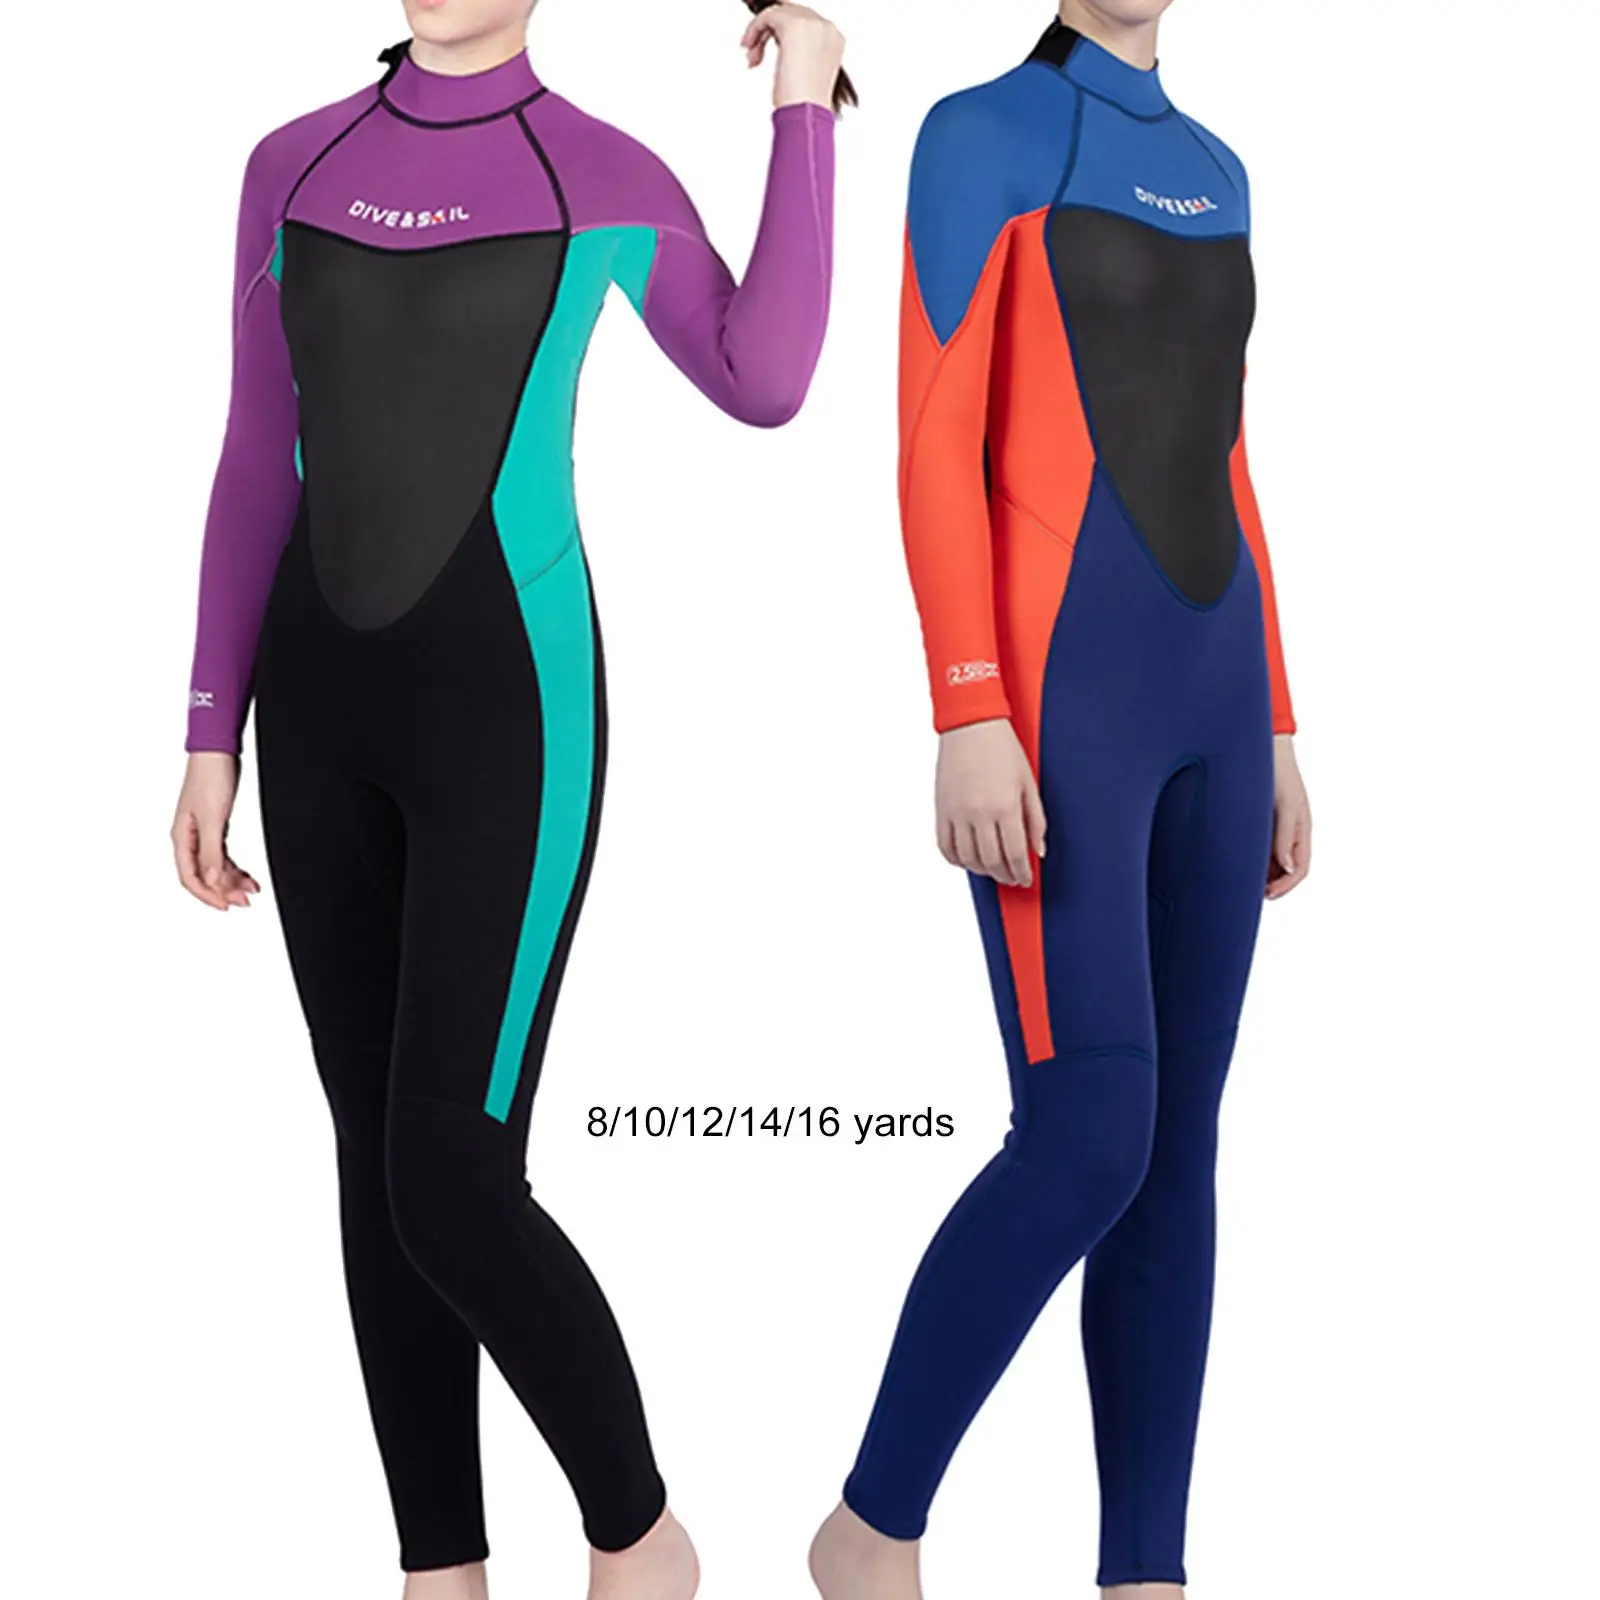 Wetsuit 2.5mm Neoprene Workout Child Wet Suit for Kayak Water Sports Sailing